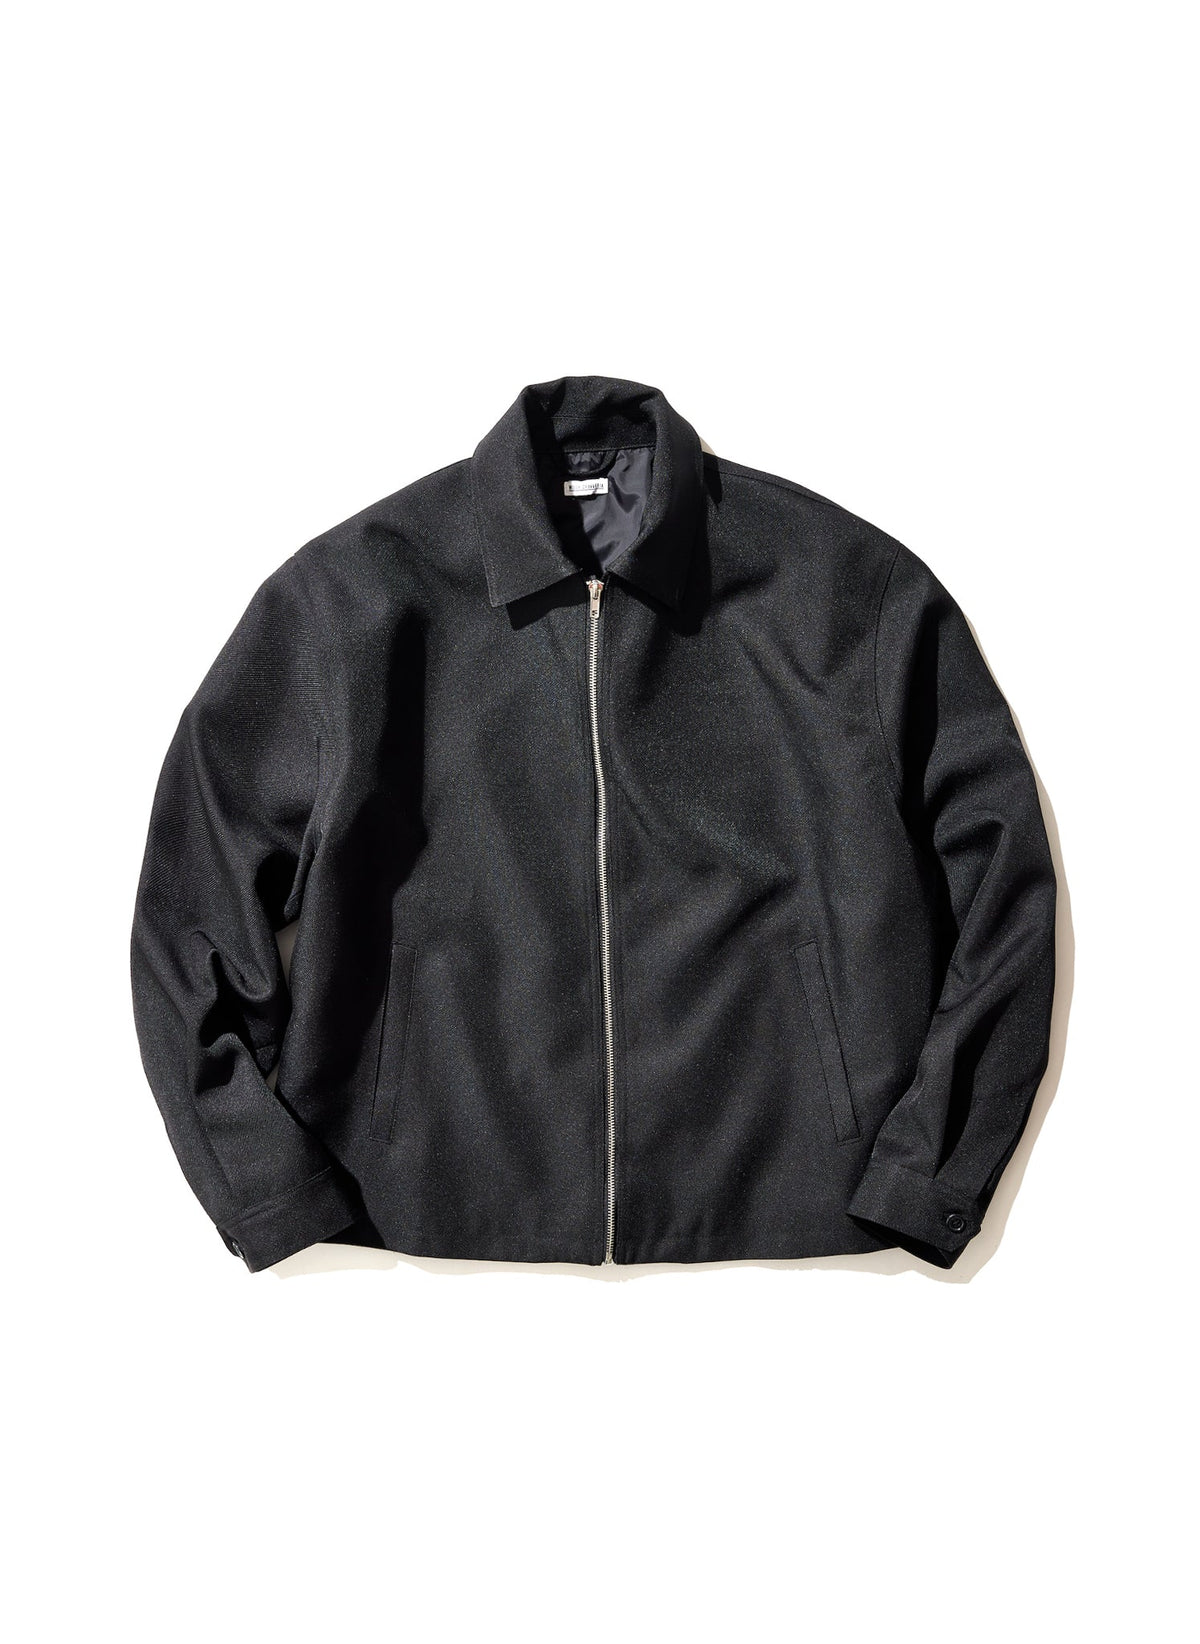 WILLY CHAVARRIA / ZIP UP BLOUSON WILLY BLACK